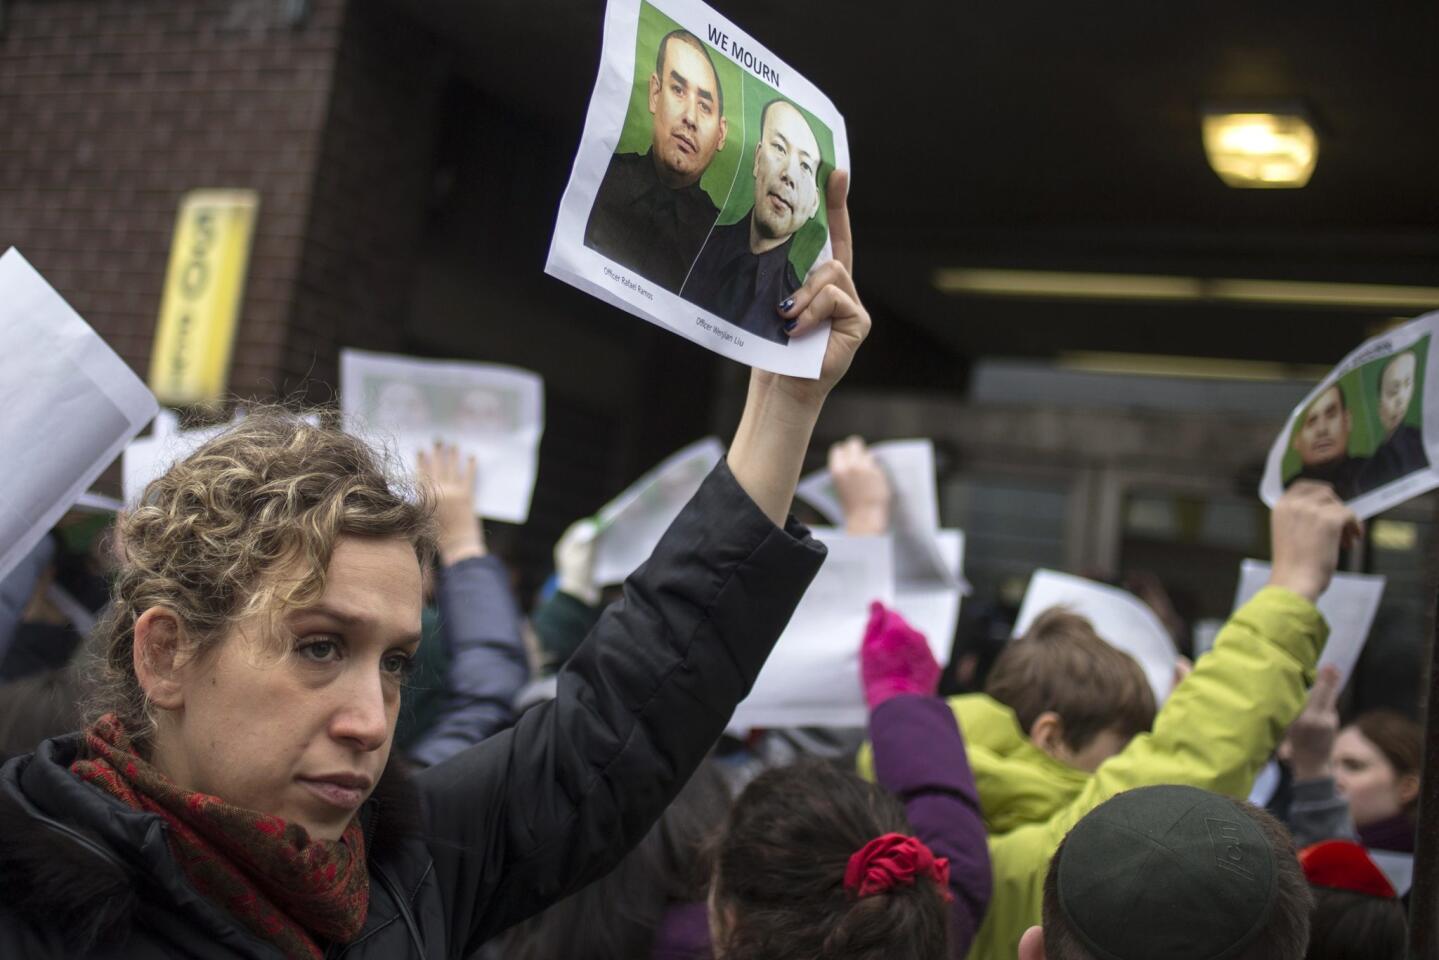 A woman holds images of slain New York Police Department (NYPD) officers Wenjian Liu and Rafael Ramos, who were shot and killed as they sat in a marked squad car in Brooklyn on Saturday, in New York